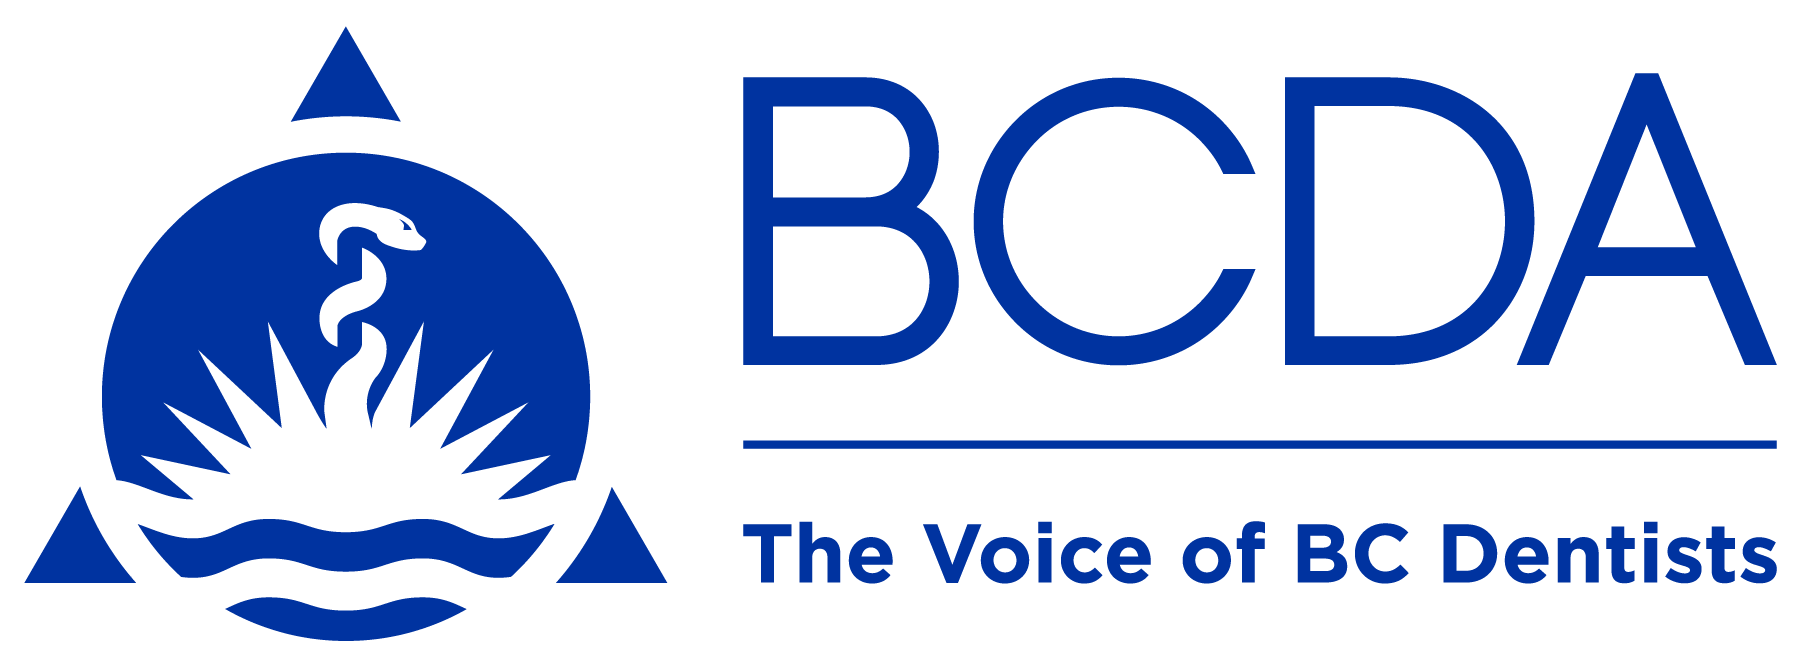 BCDA The Voice of BC Dentists